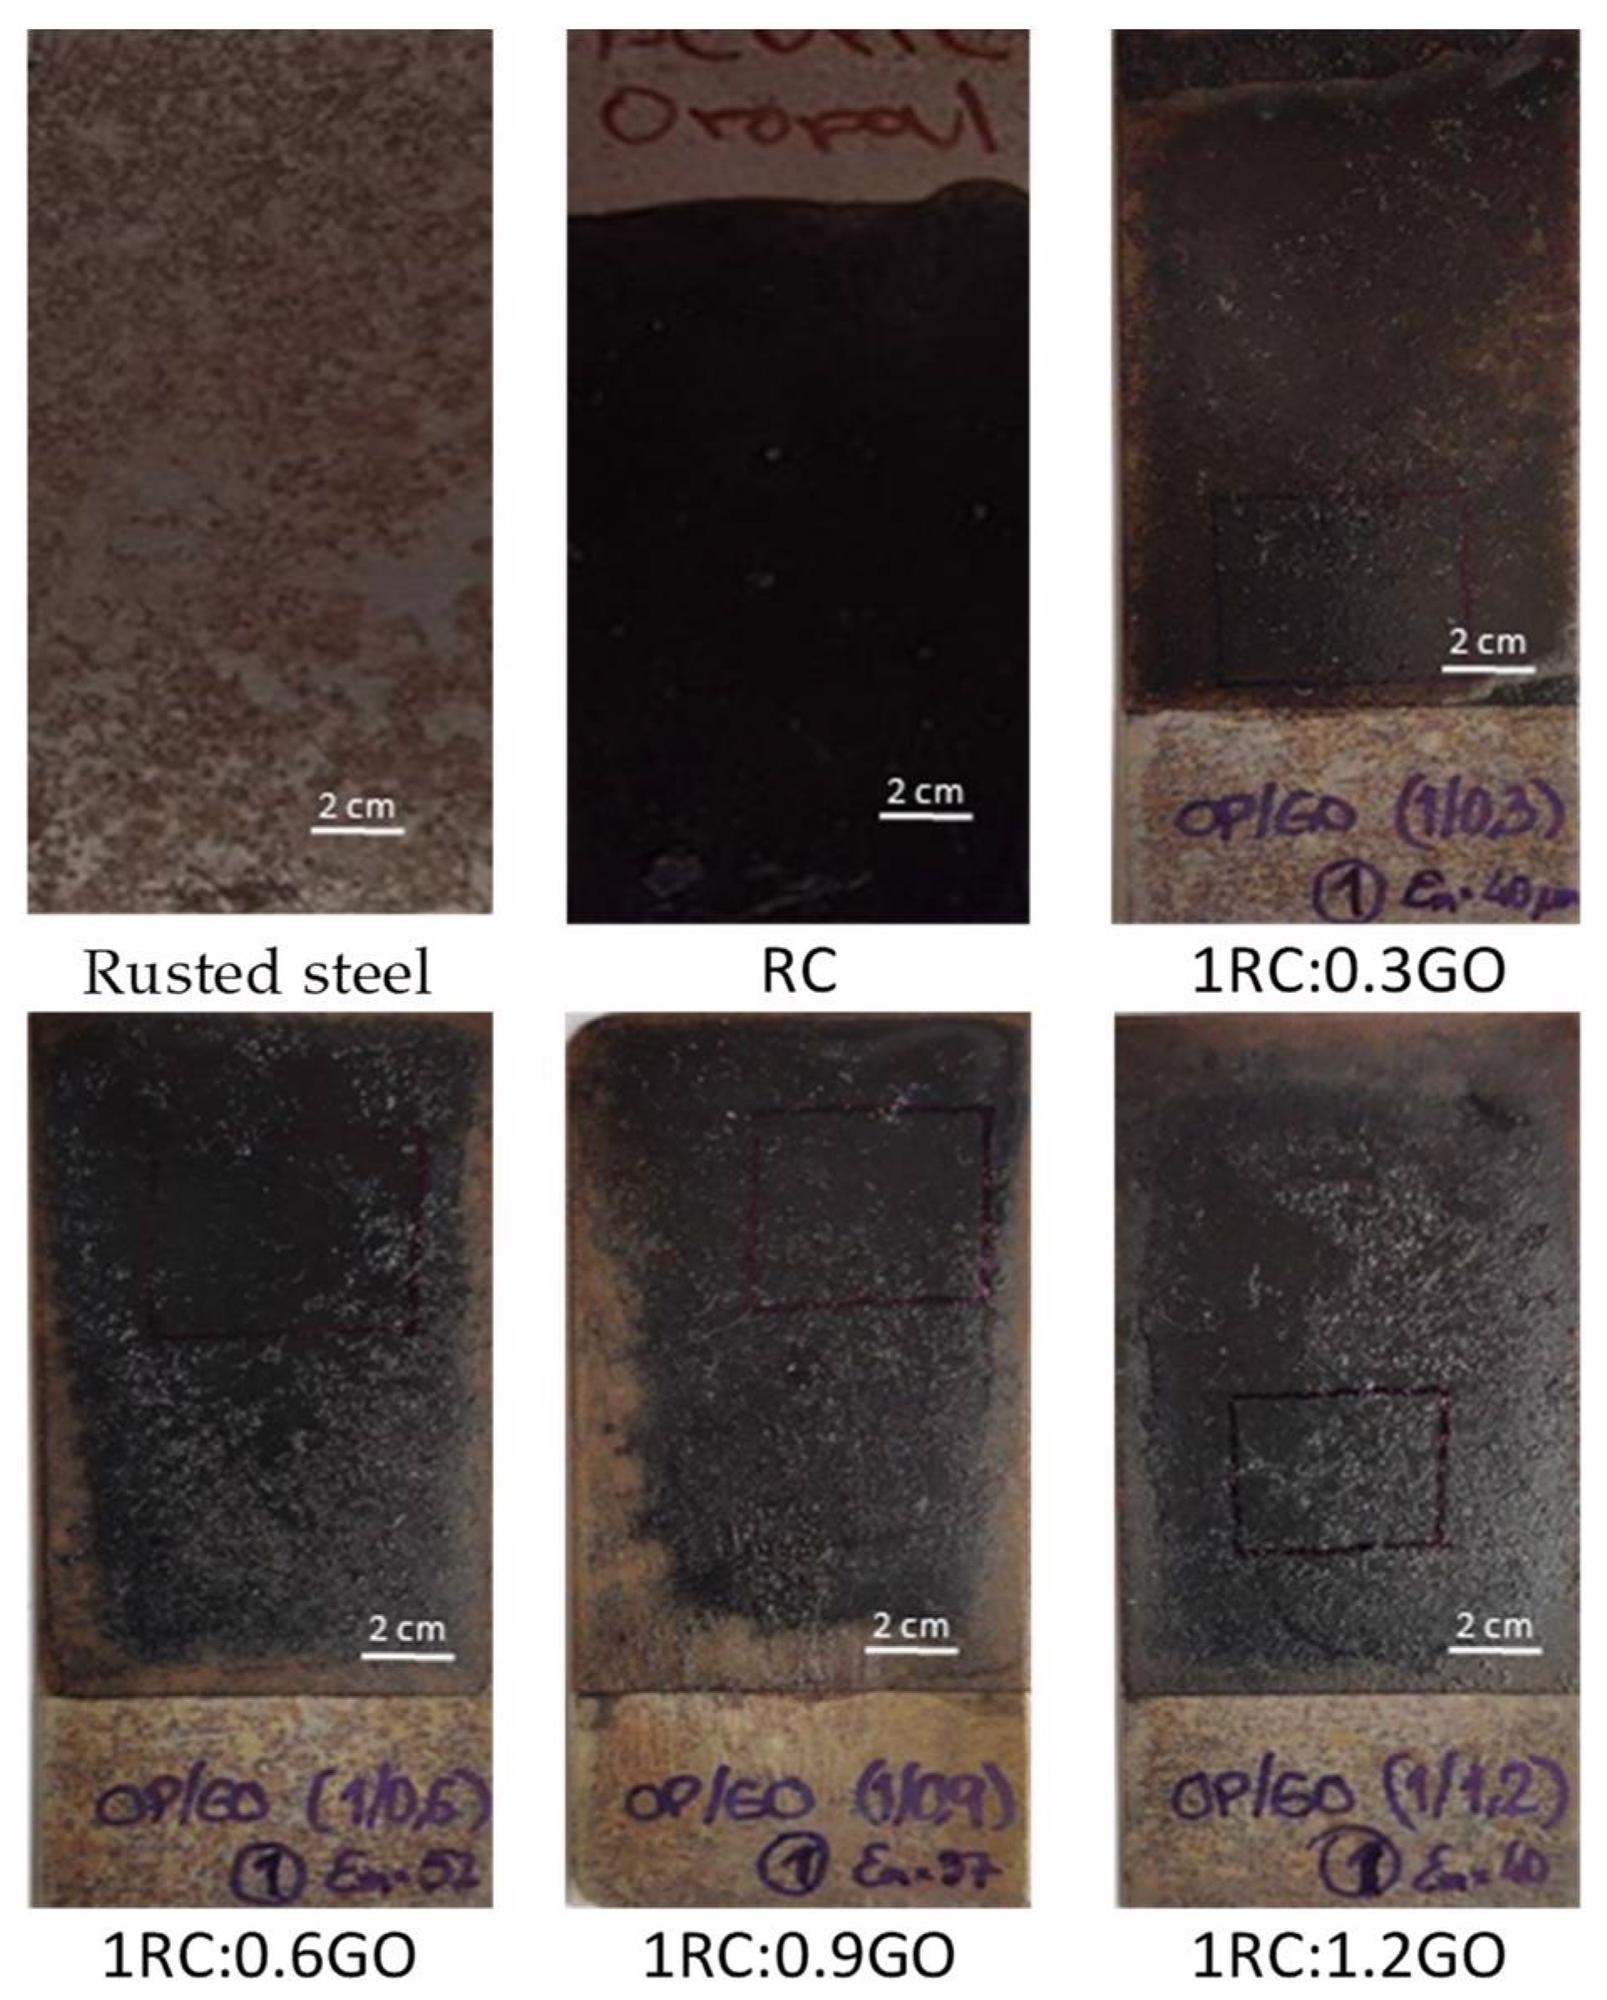 Pictures of rusted steel samples that were coated using the different RC:GO ratios, with 80 mm × 30 mm × 1 mm dimensions.